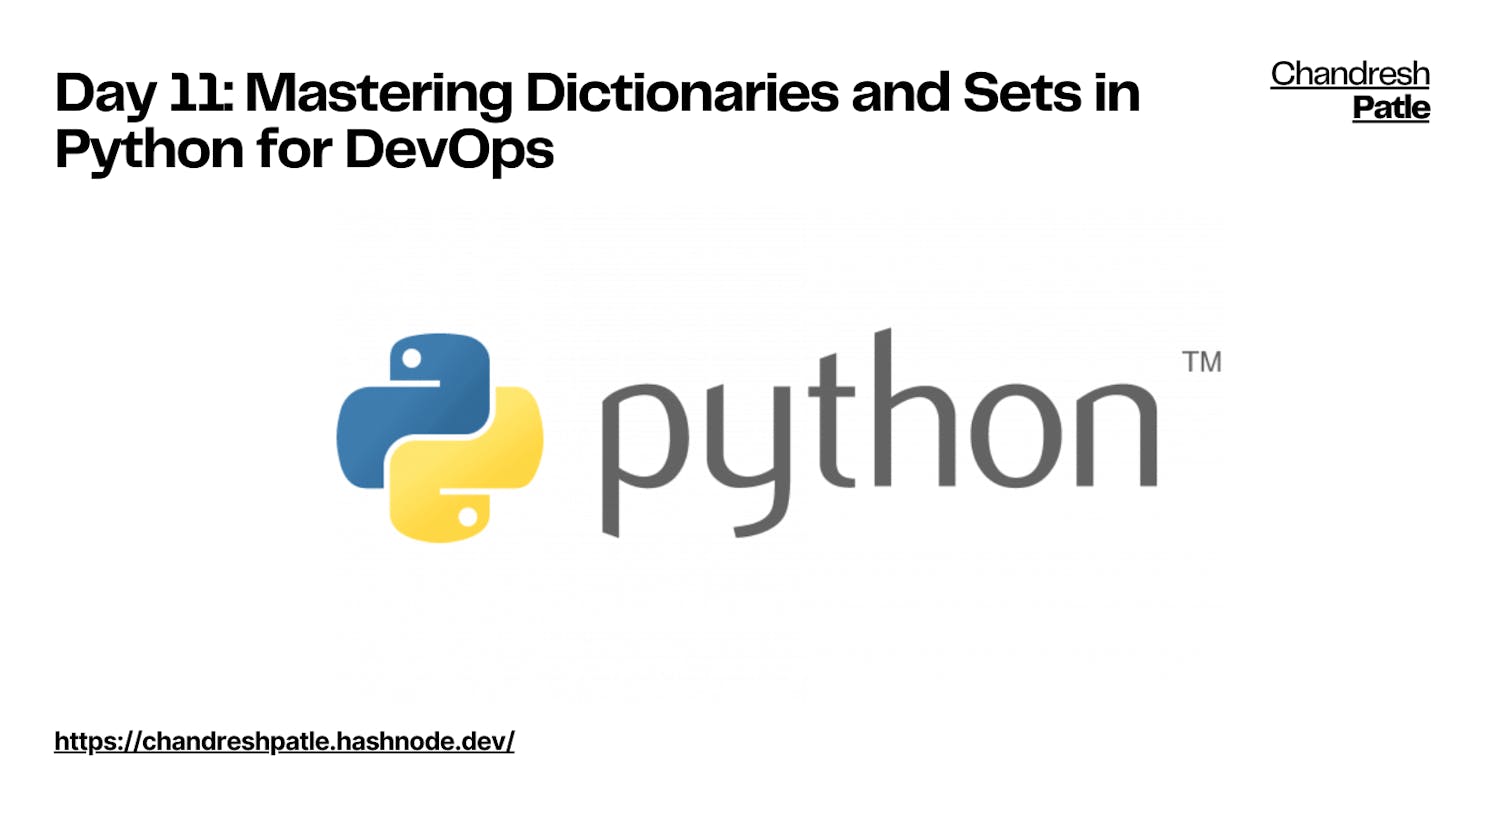 Day 11: Mastering Dictionaries and Sets in Python for DevOps